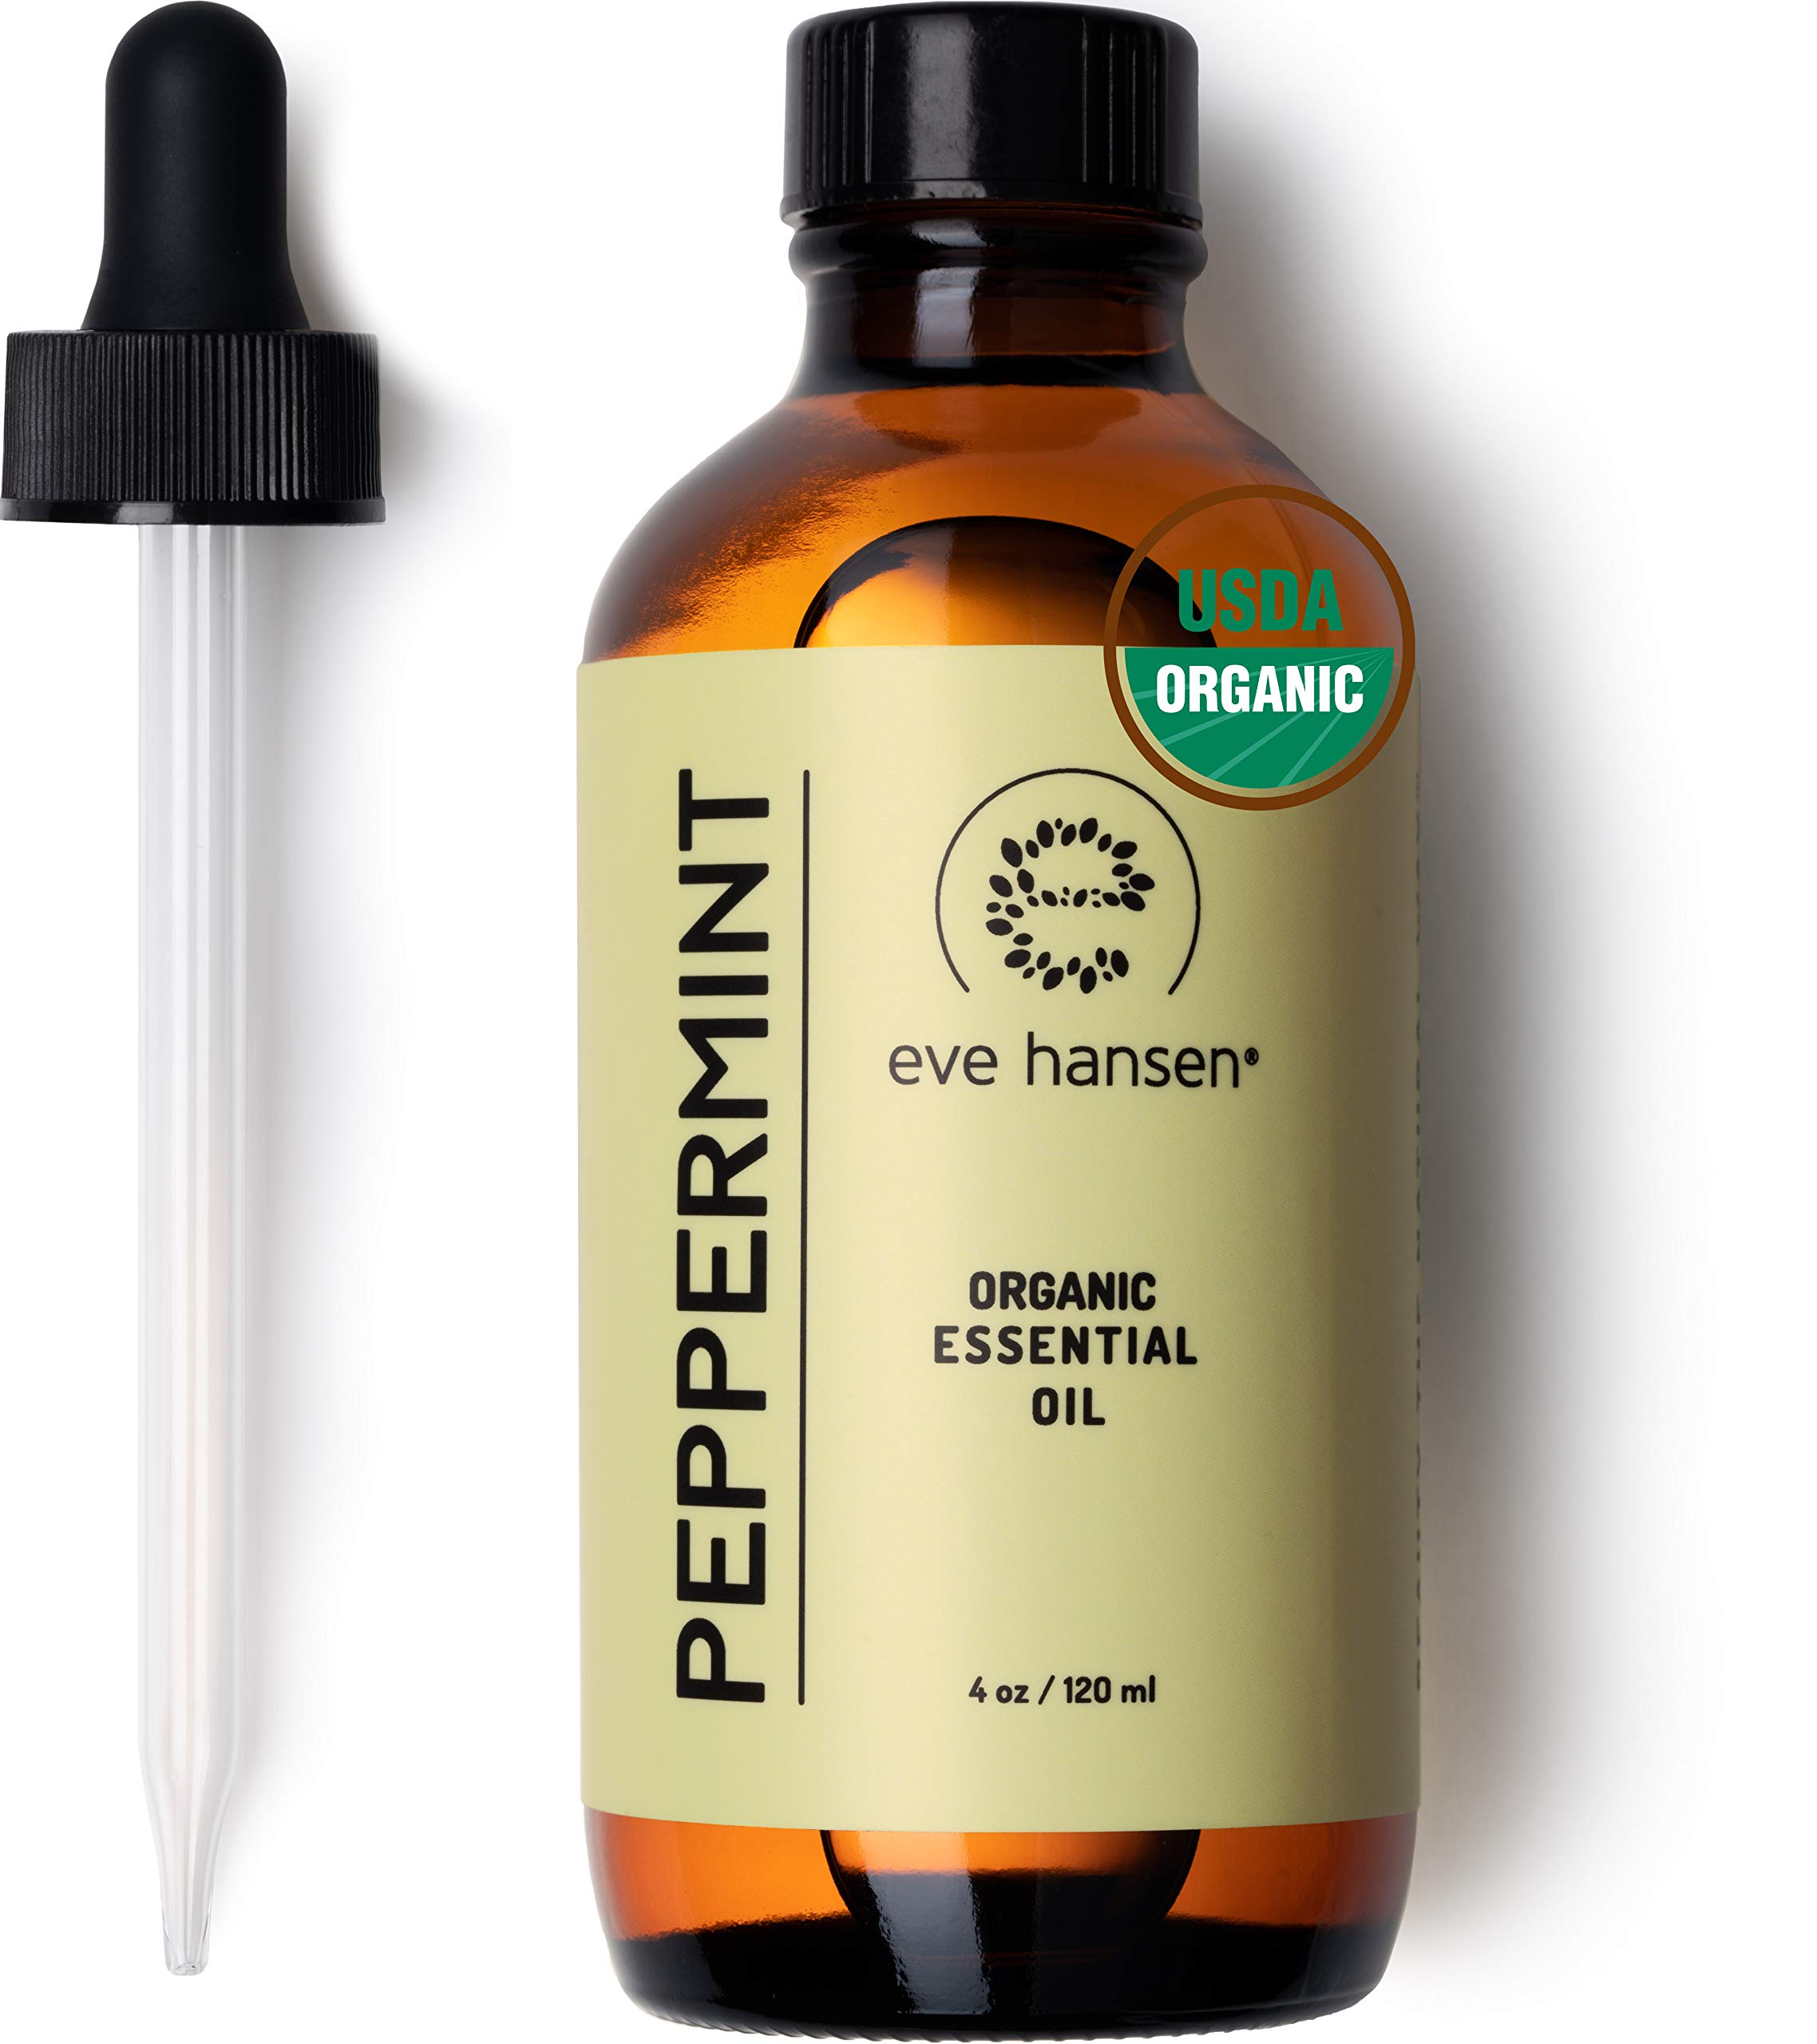 Eve Hansen USDA Certified Organic Peppermint Essential Oil | Huge 4 oz Mentha PIPERITA Essential Oil for Aromatherapy | Aromatherapy Oil for Diffuser and Pure Essential Oil for Home Use